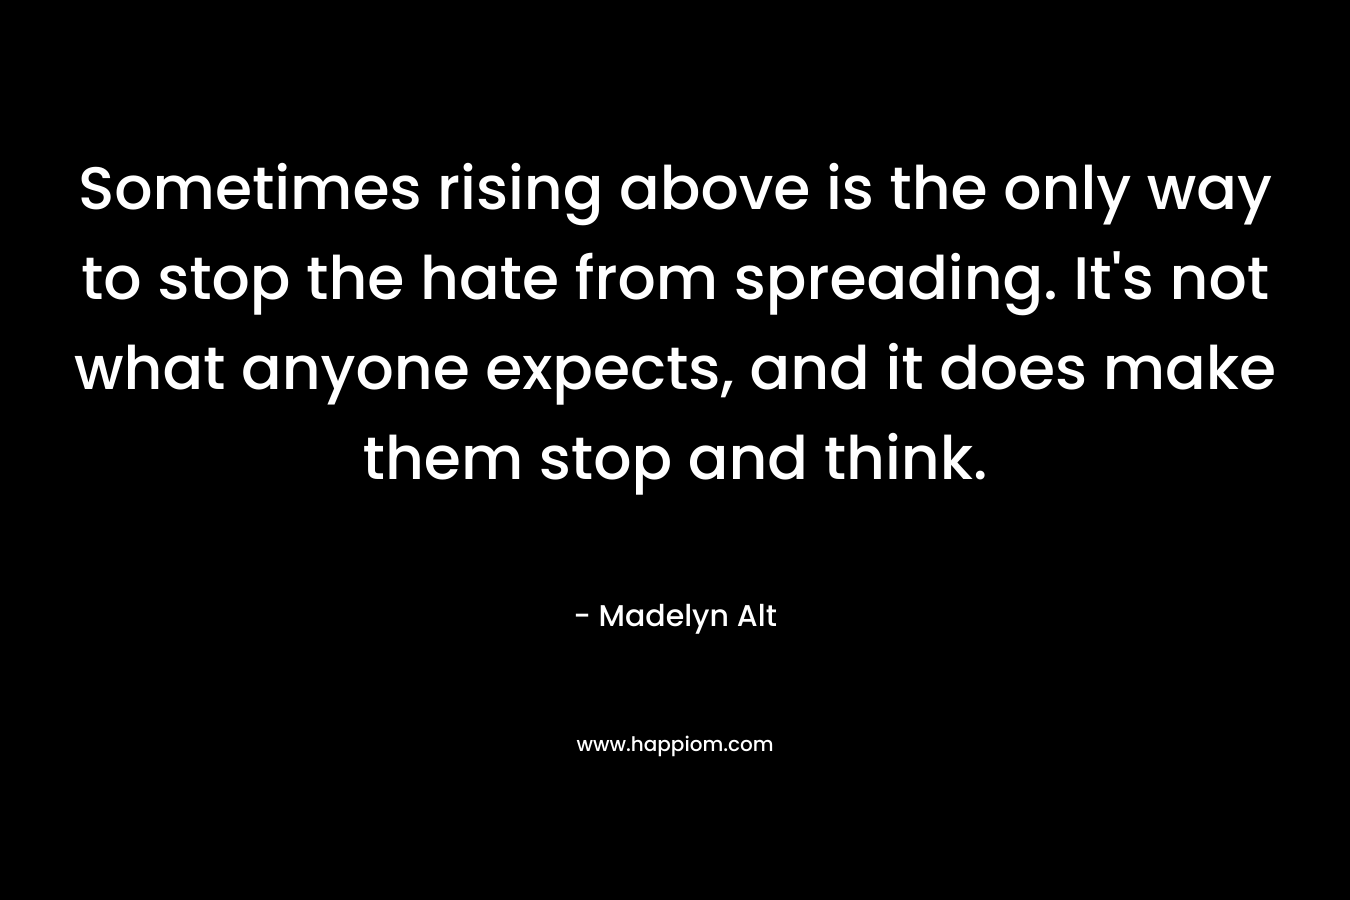 Sometimes rising above is the only way to stop the hate from spreading. It’s not what anyone expects, and it does make them stop and think. – Madelyn Alt